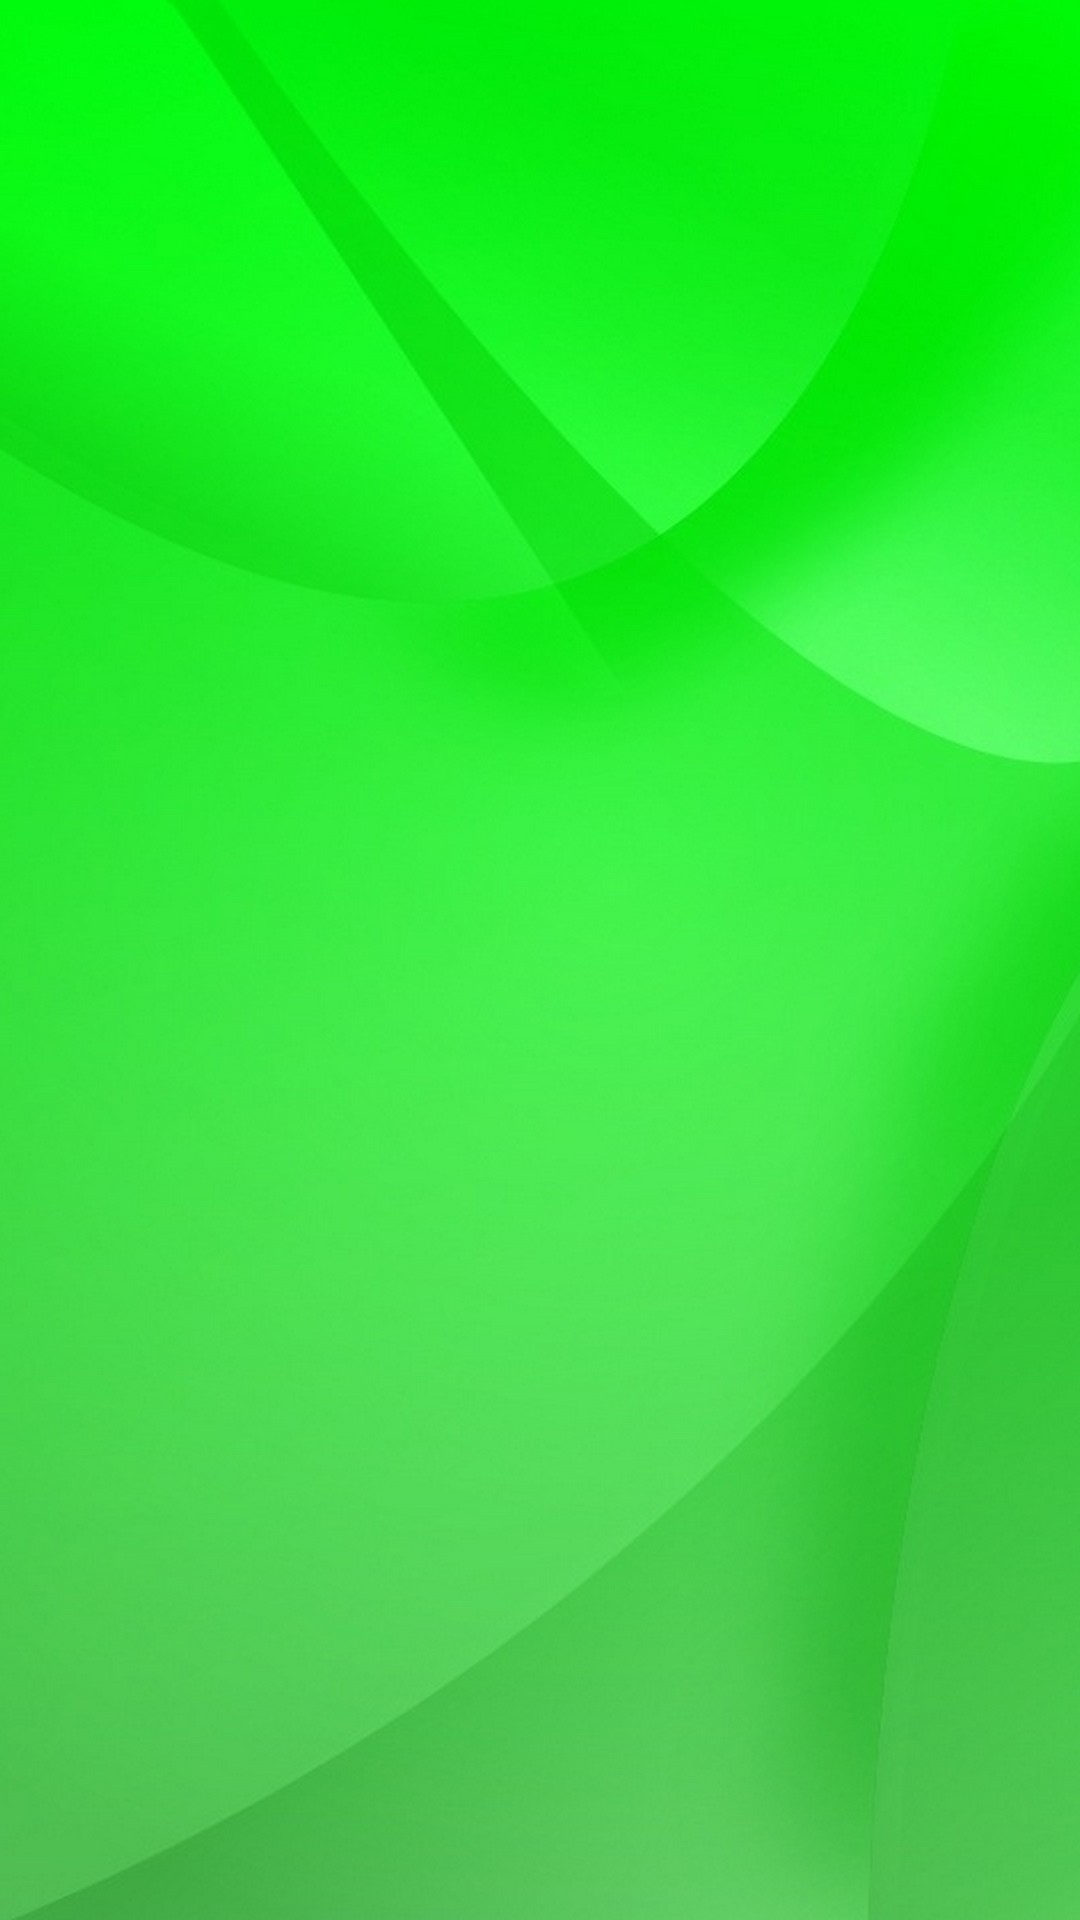 Android Wallpaper Light Green with image resolution 1080x1920 pixel. You can make this wallpaper for your Android backgrounds, Tablet, Smartphones Screensavers and Mobile Phone Lock Screen